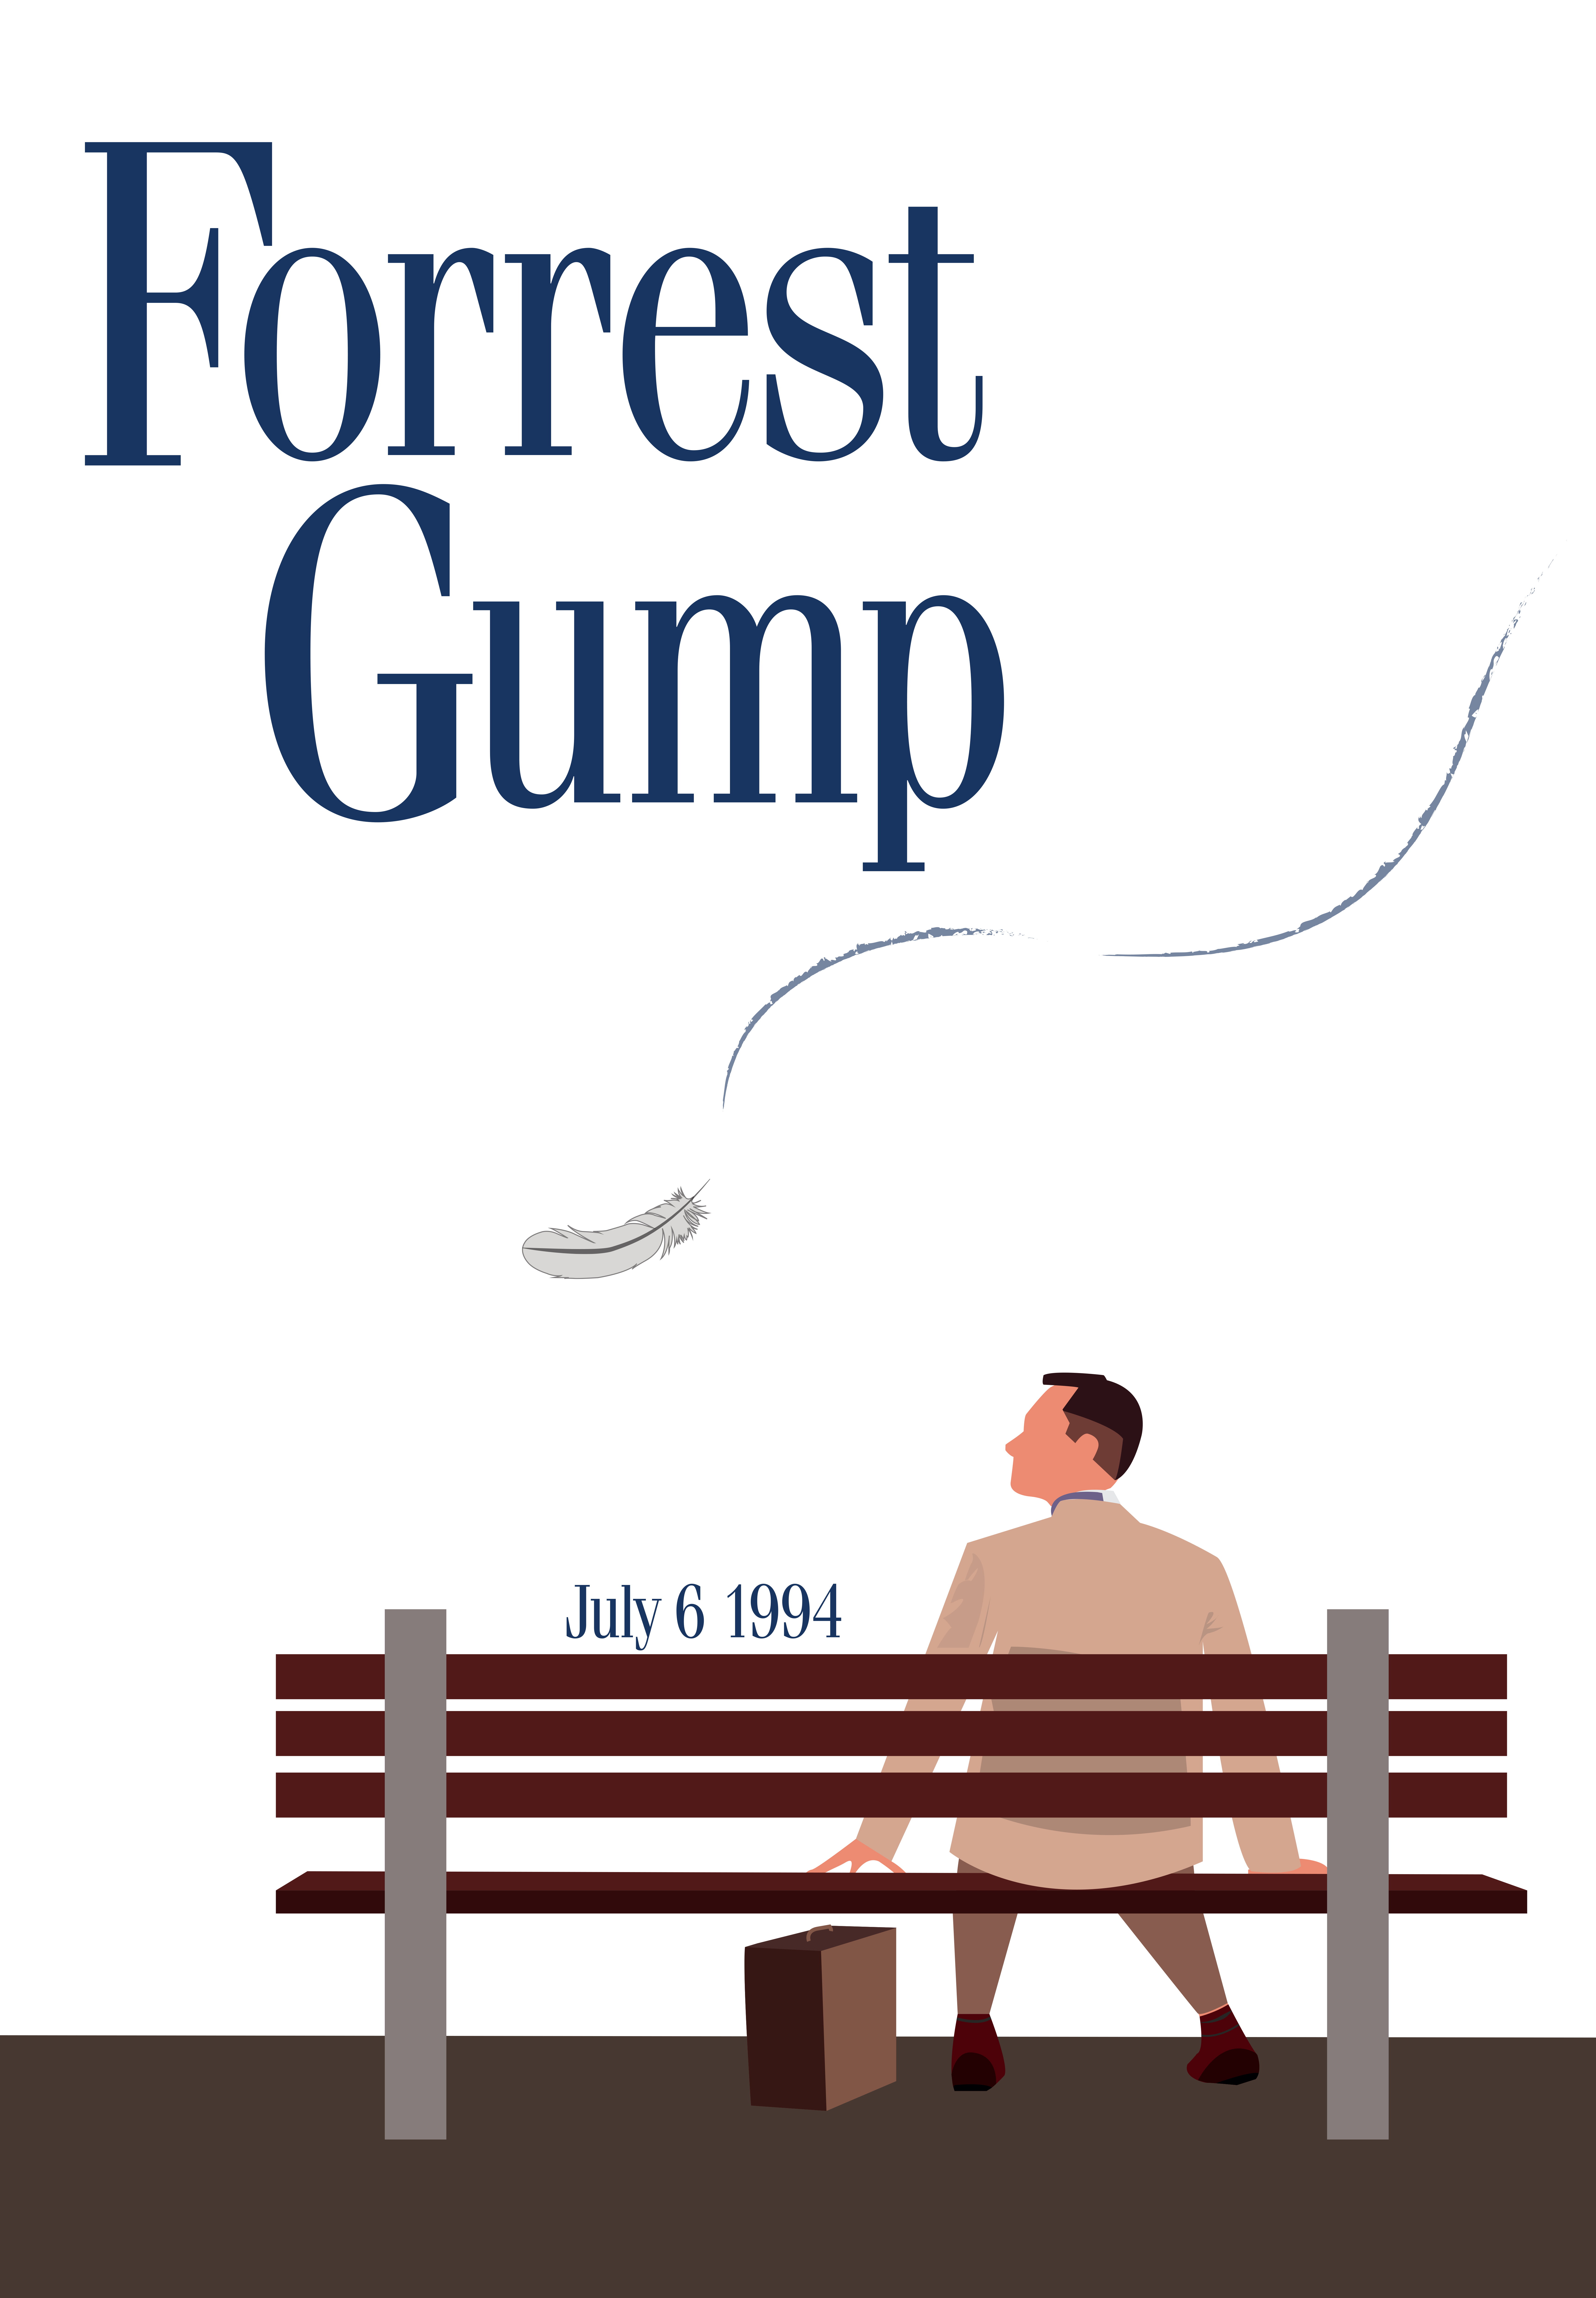 Forrest Gump vector by IDN666